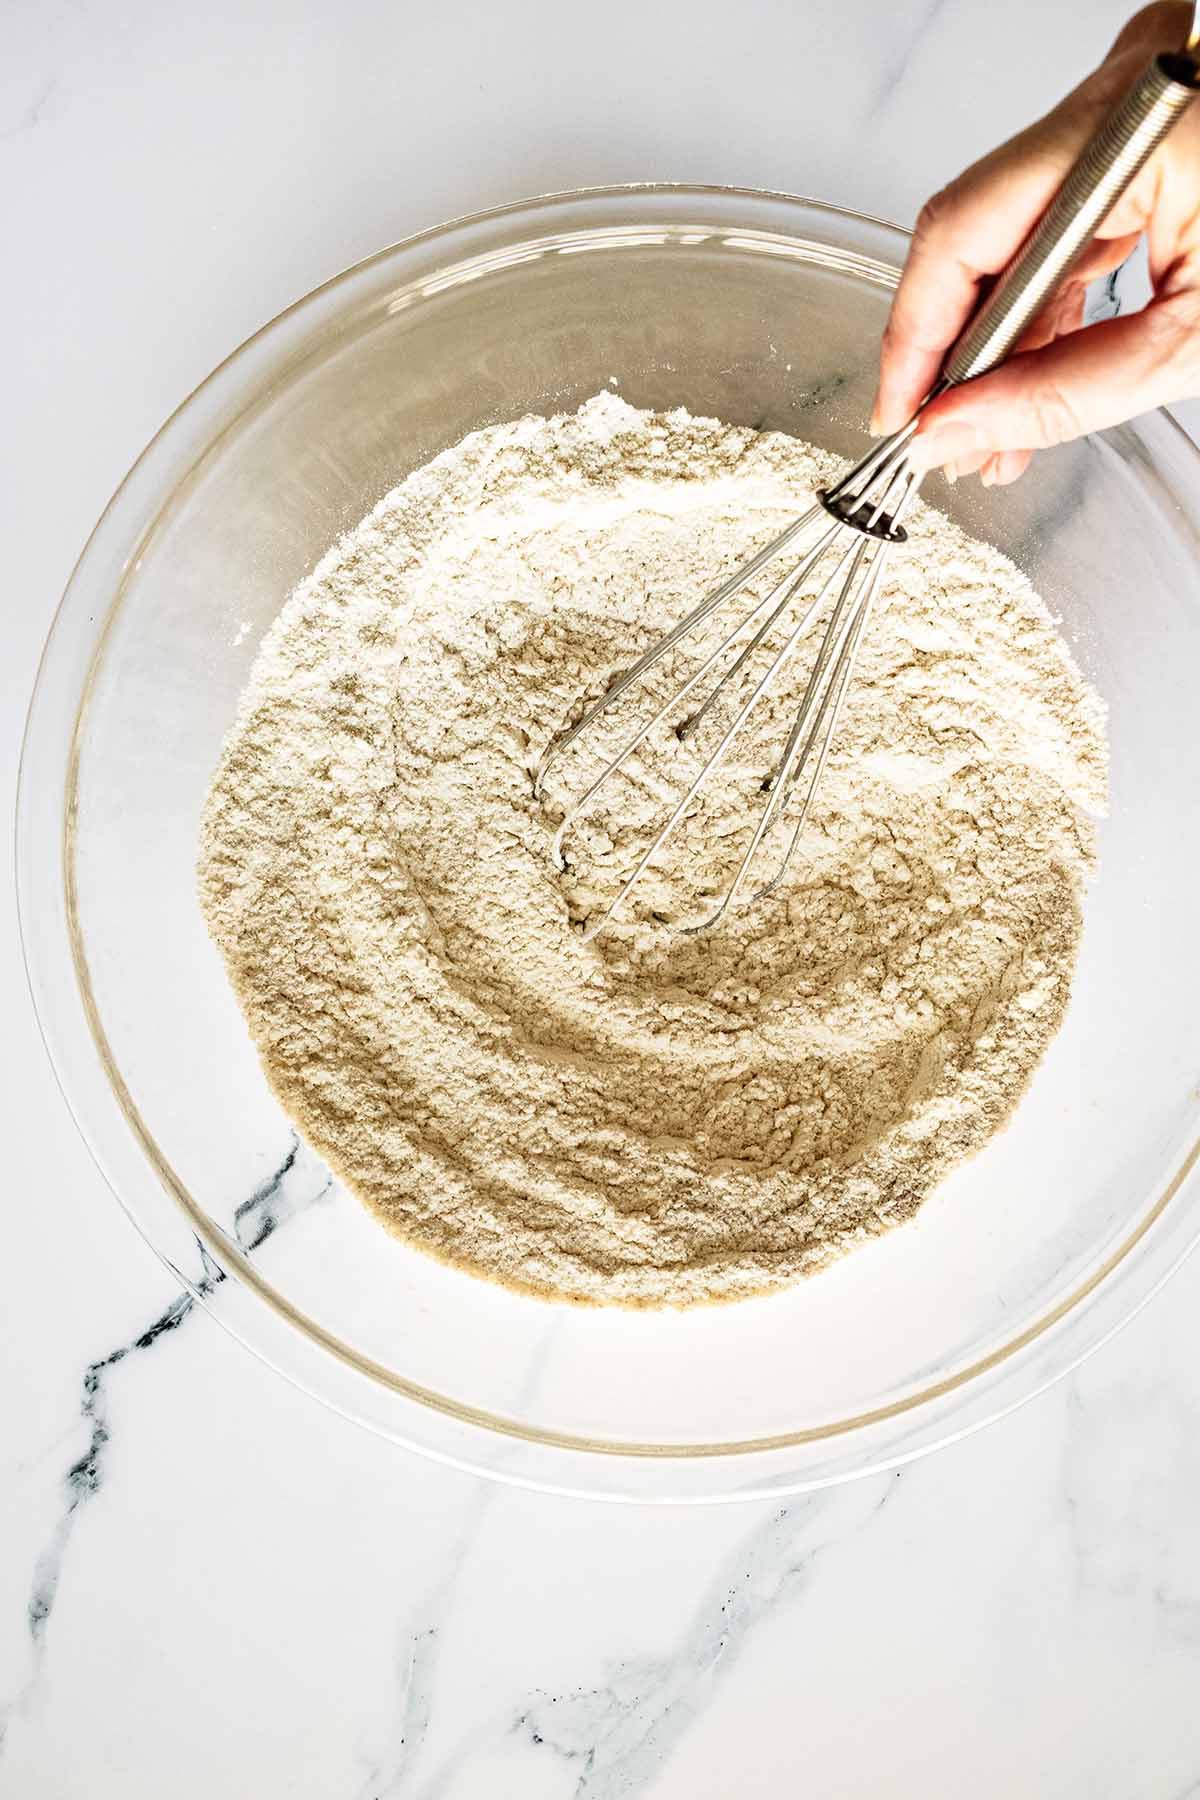 Dry ingredients in a glass bowl being stirred with a wire whisk